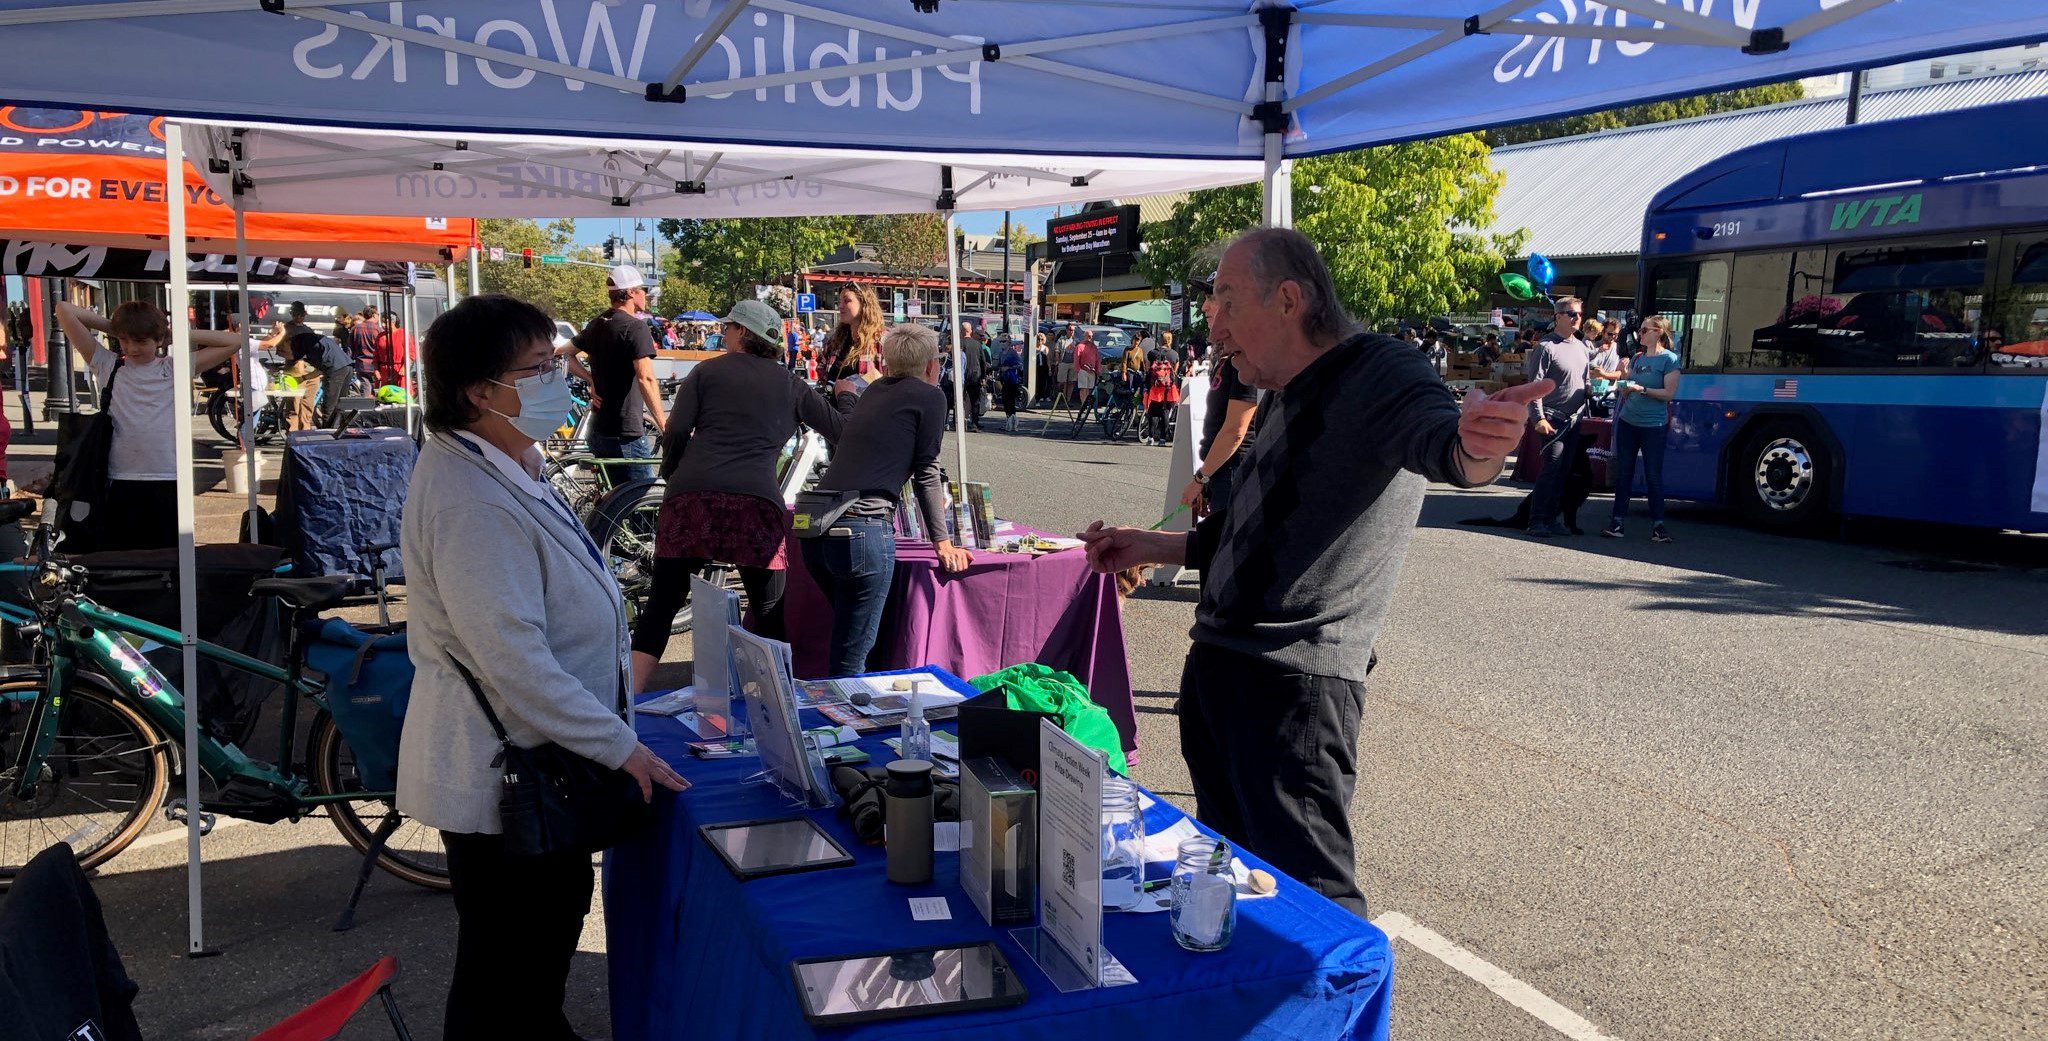 Two individuals talking at an informational table outside. People are in the background walking around the Farmers Market. There is a parked WTA bus and several bikes in the background.